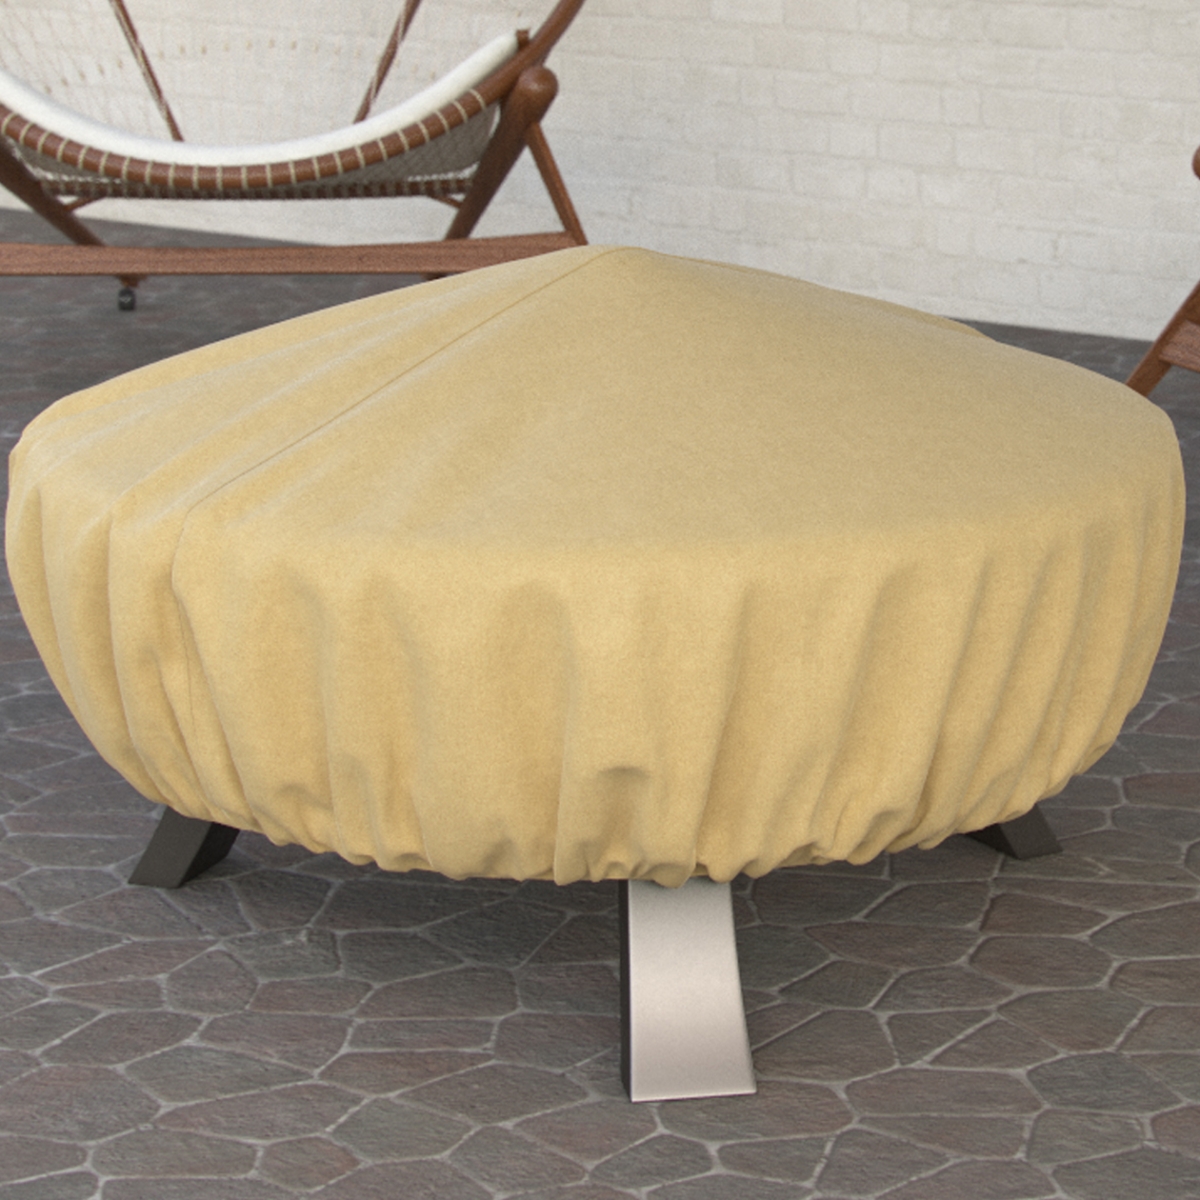 Lrfp5515 Fade Proof Tane 44 In. Heavy Duty Durable & Water Resistant Round Fire Pit Cover, Large